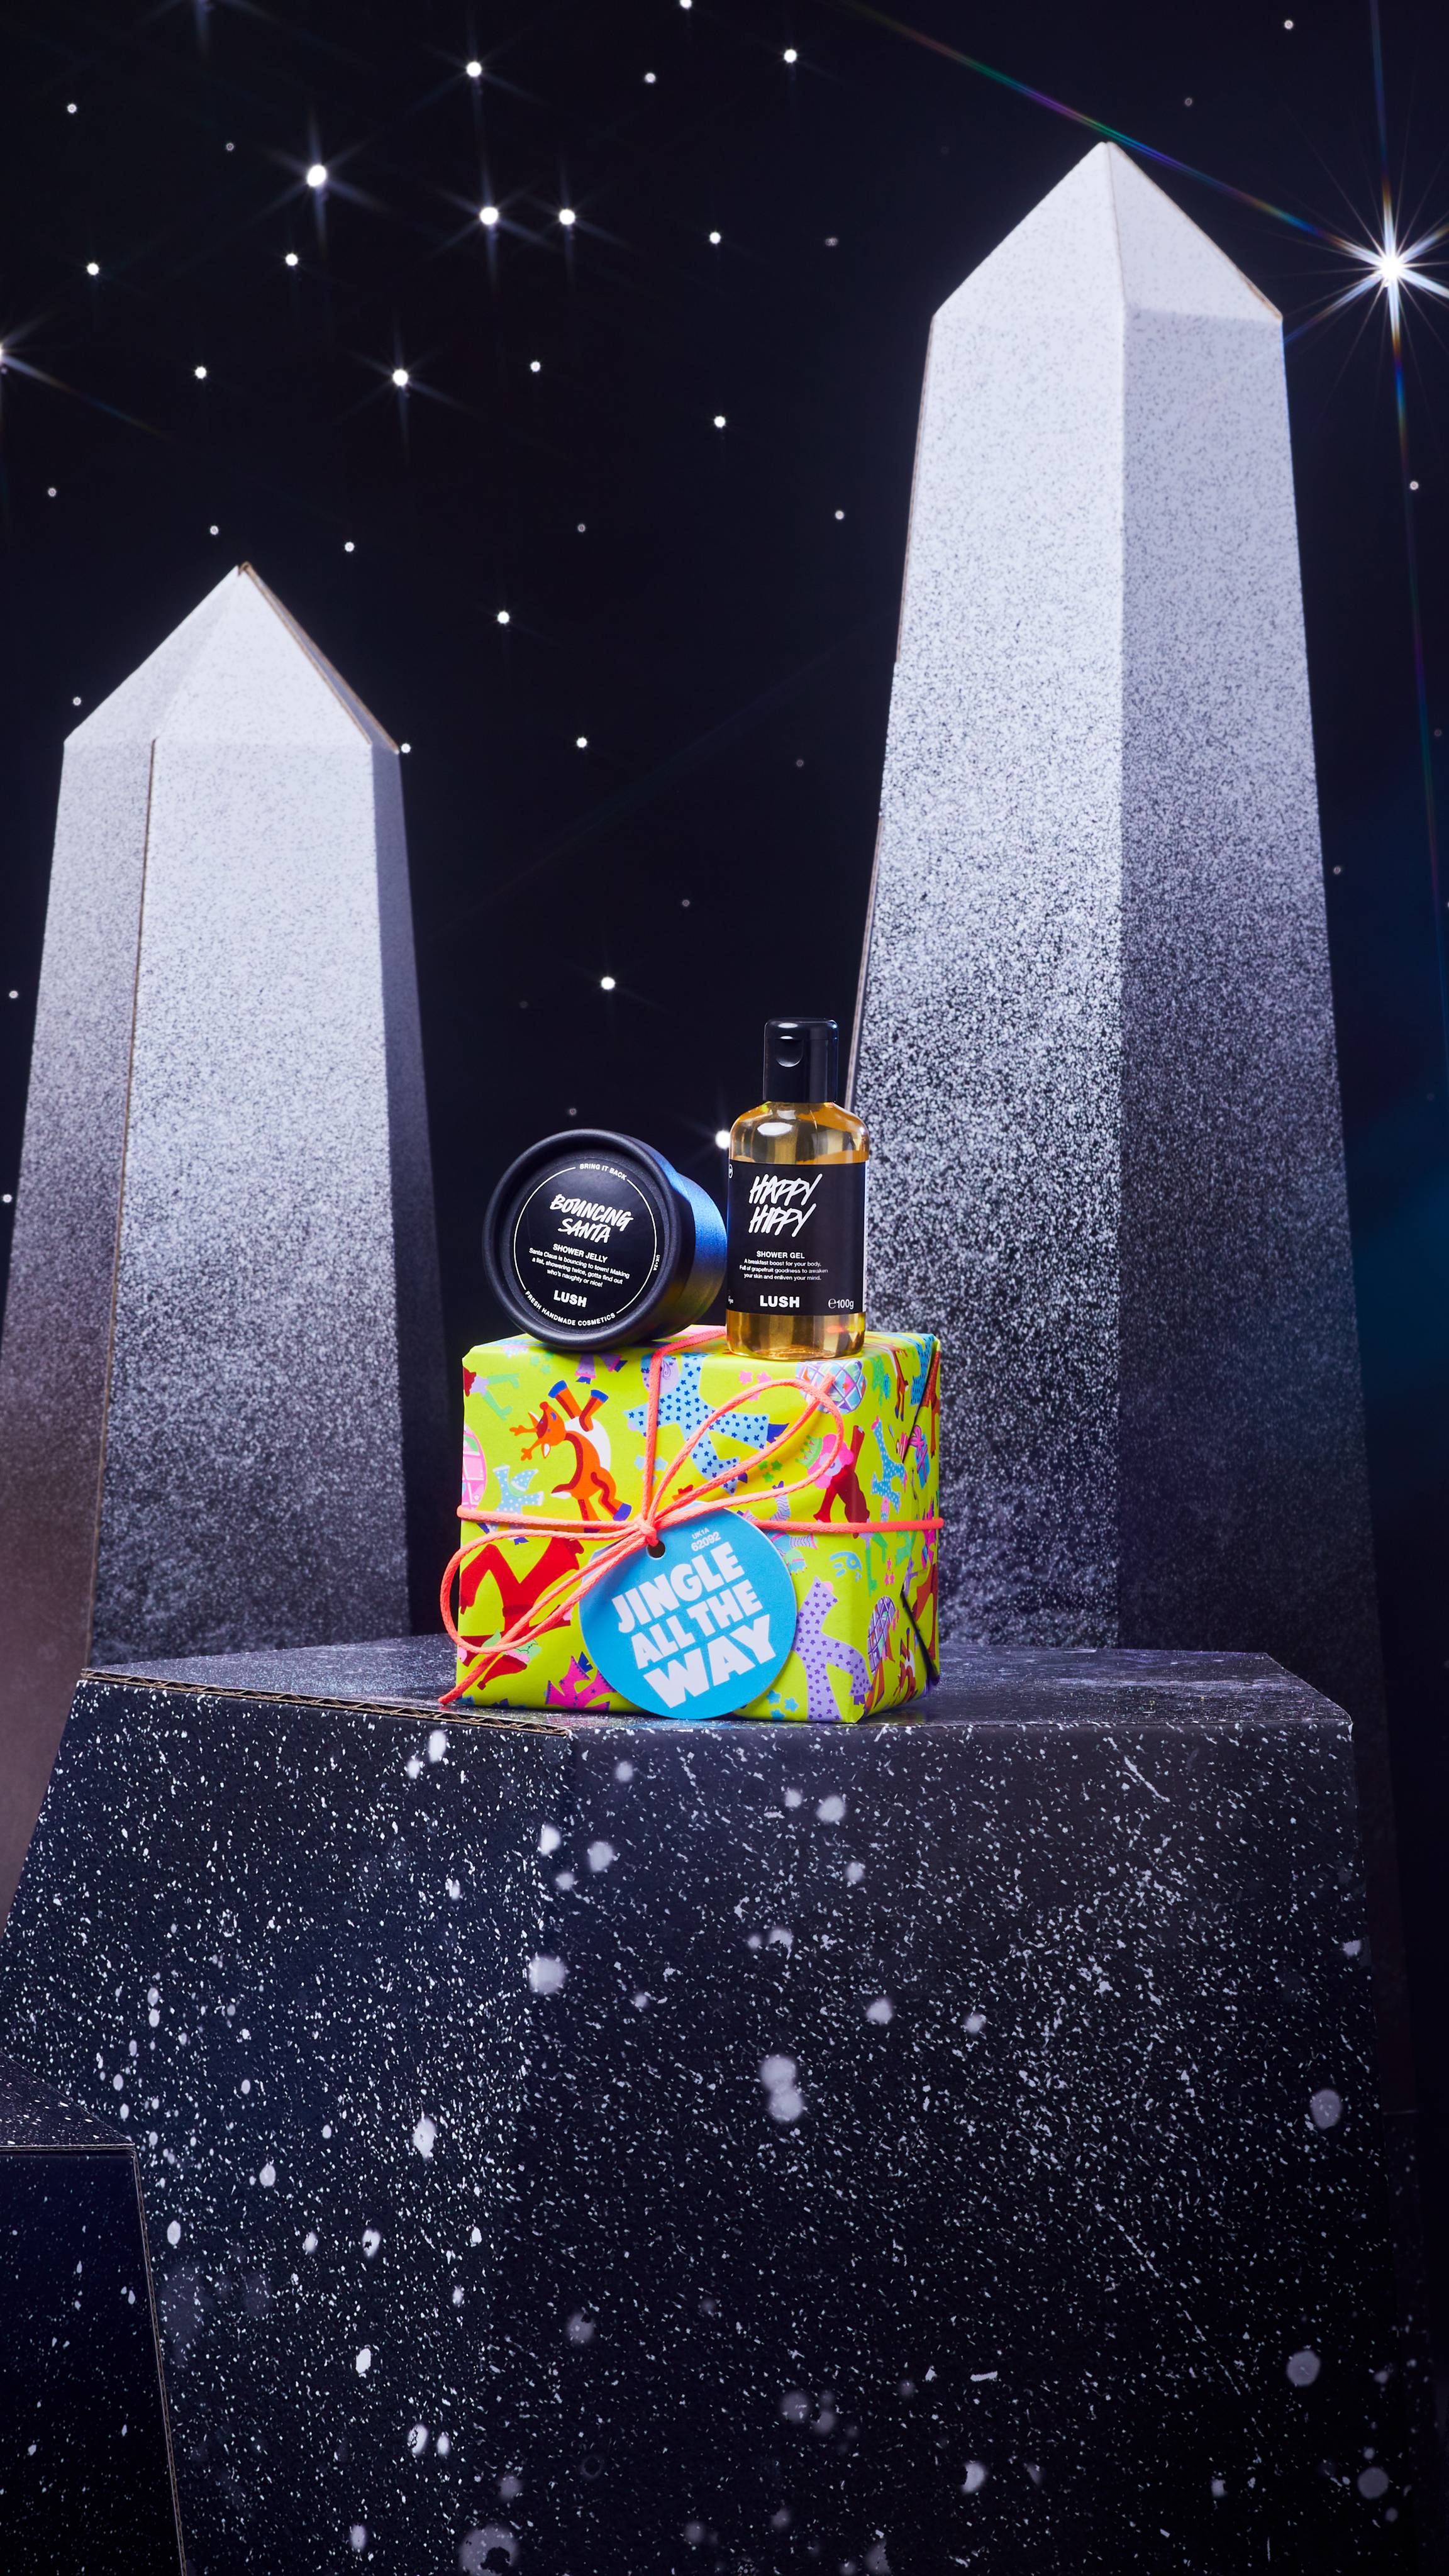 Jingle All The Way gift box and two shower products are on a dark chromatic platform among geometric shapes. 